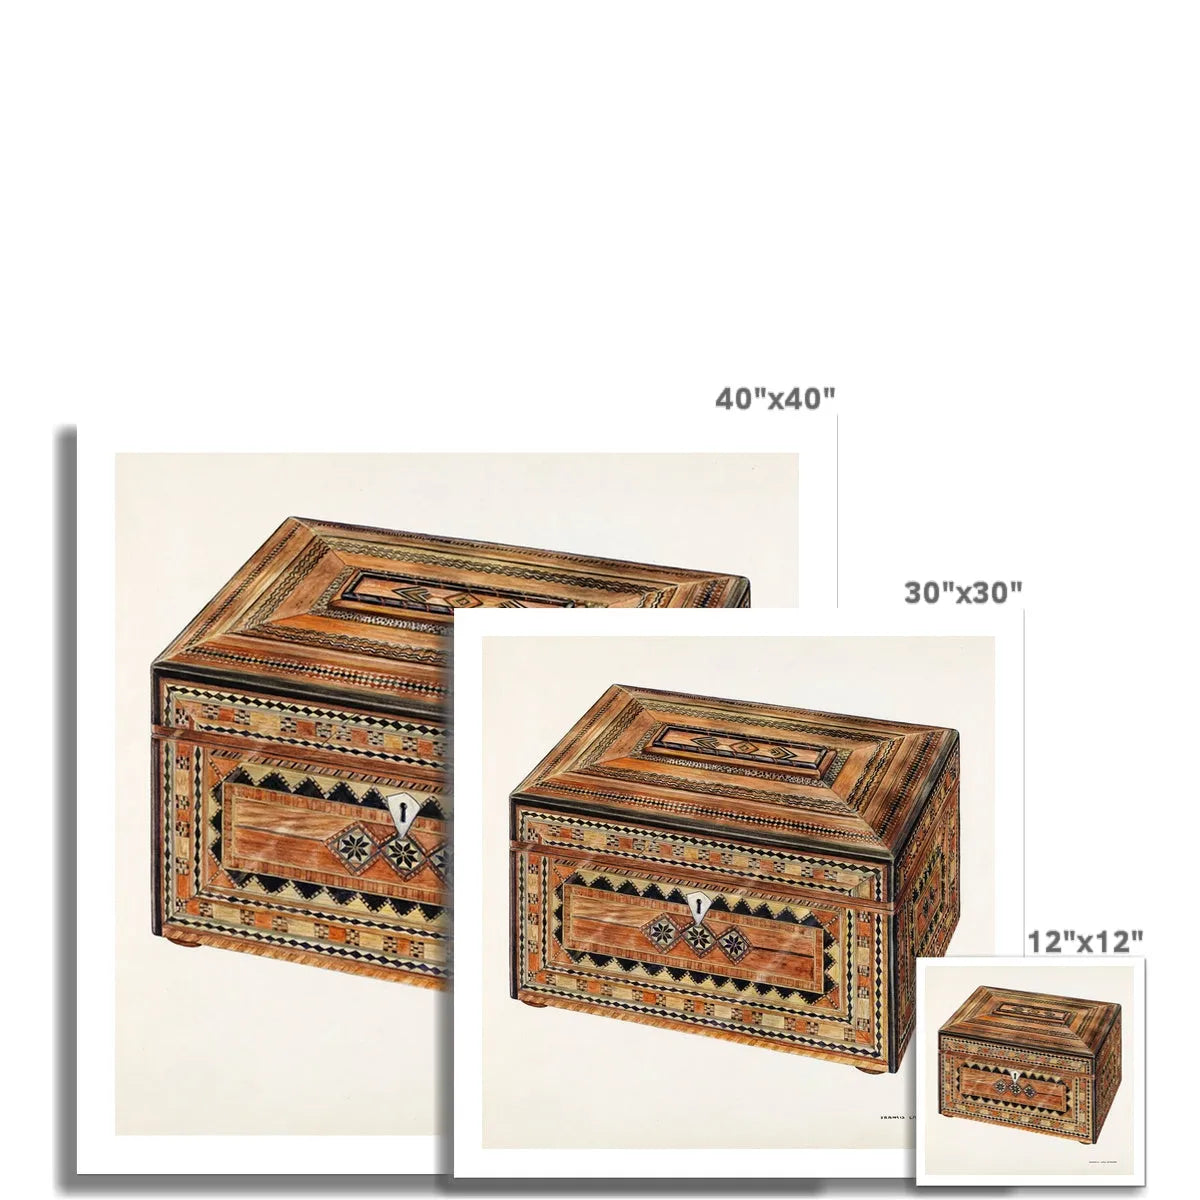 Inlaid Sewing Box By Francis Law Durand Fine Art Print - Posters Prints & Visual Artwork - Aesthetic Art